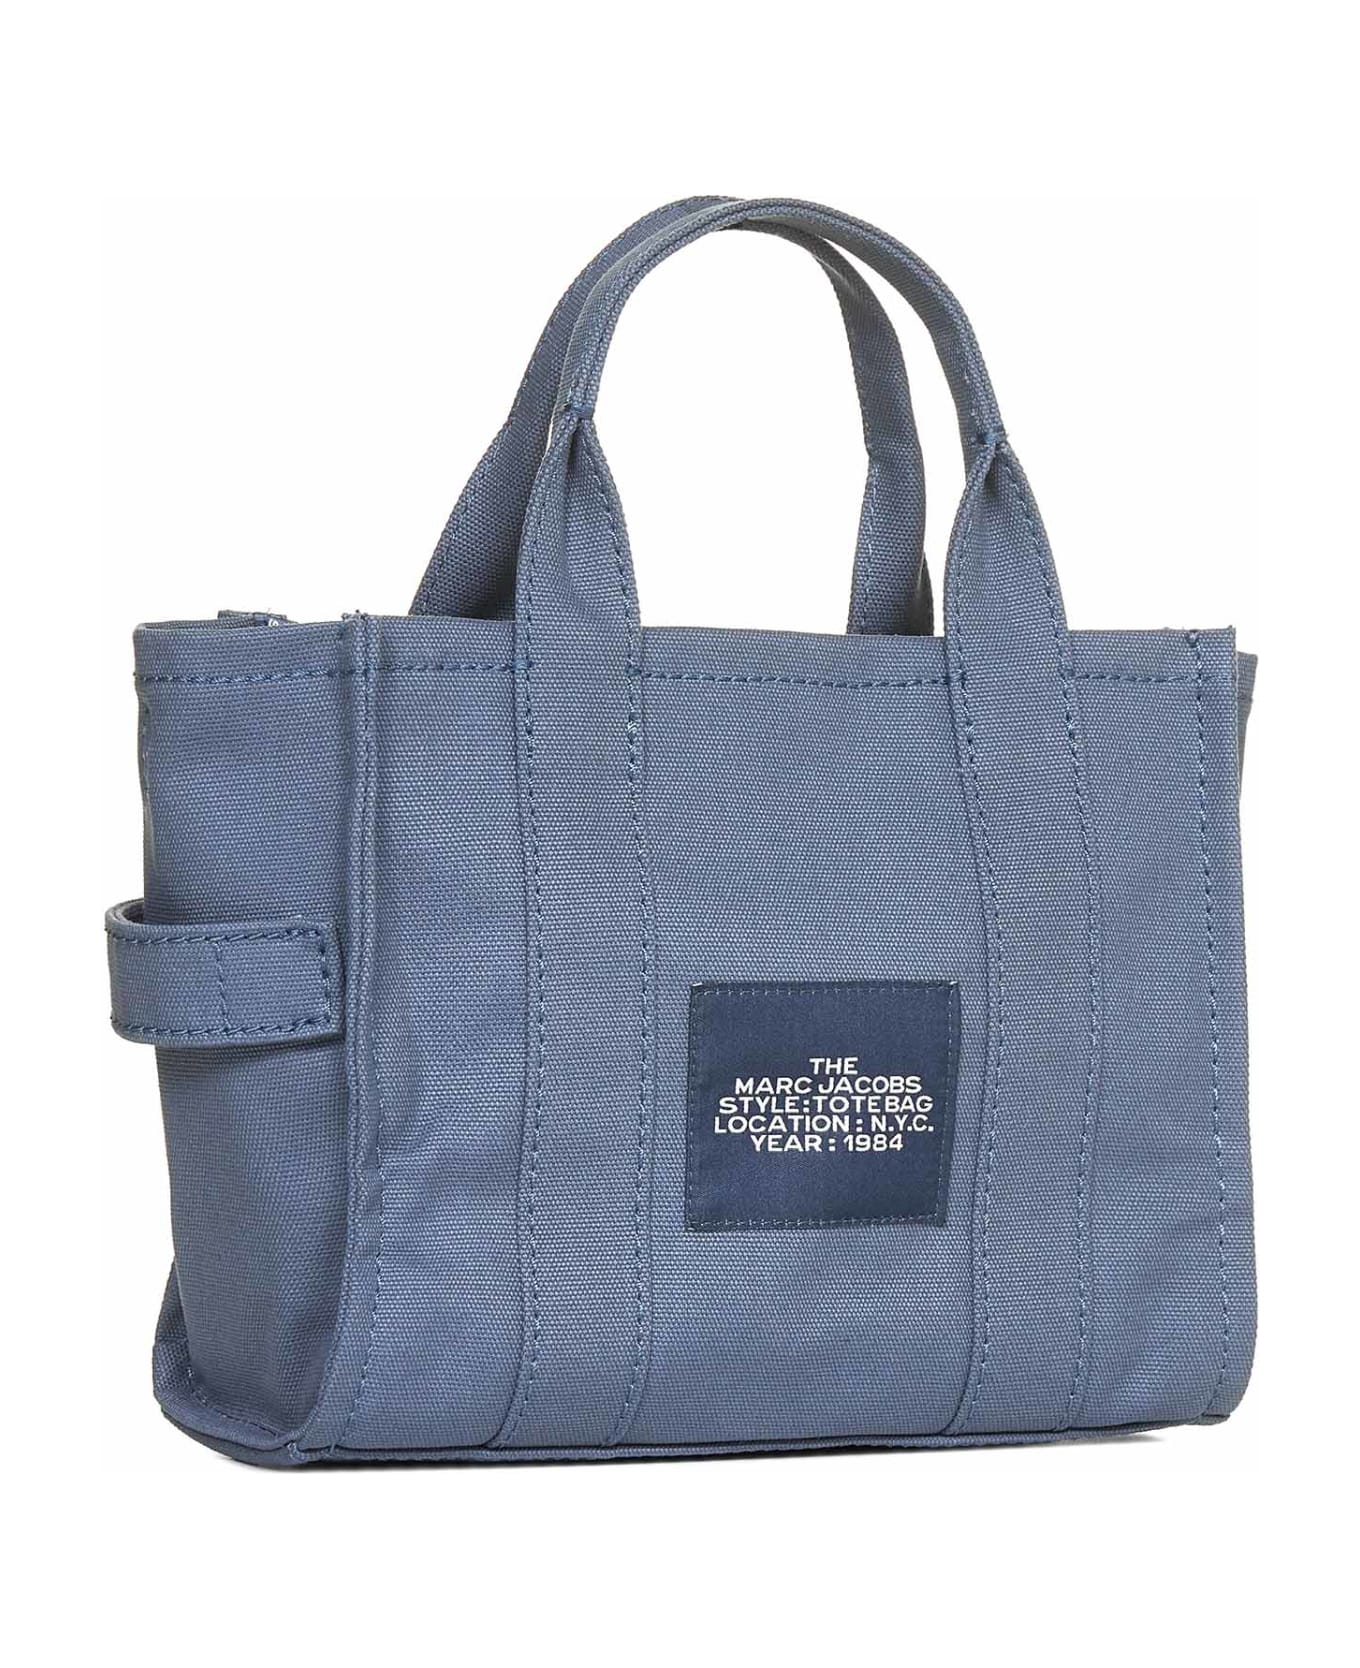 Marc Jacobs The Tote Small Bag - Blue Shadow トートバッグ